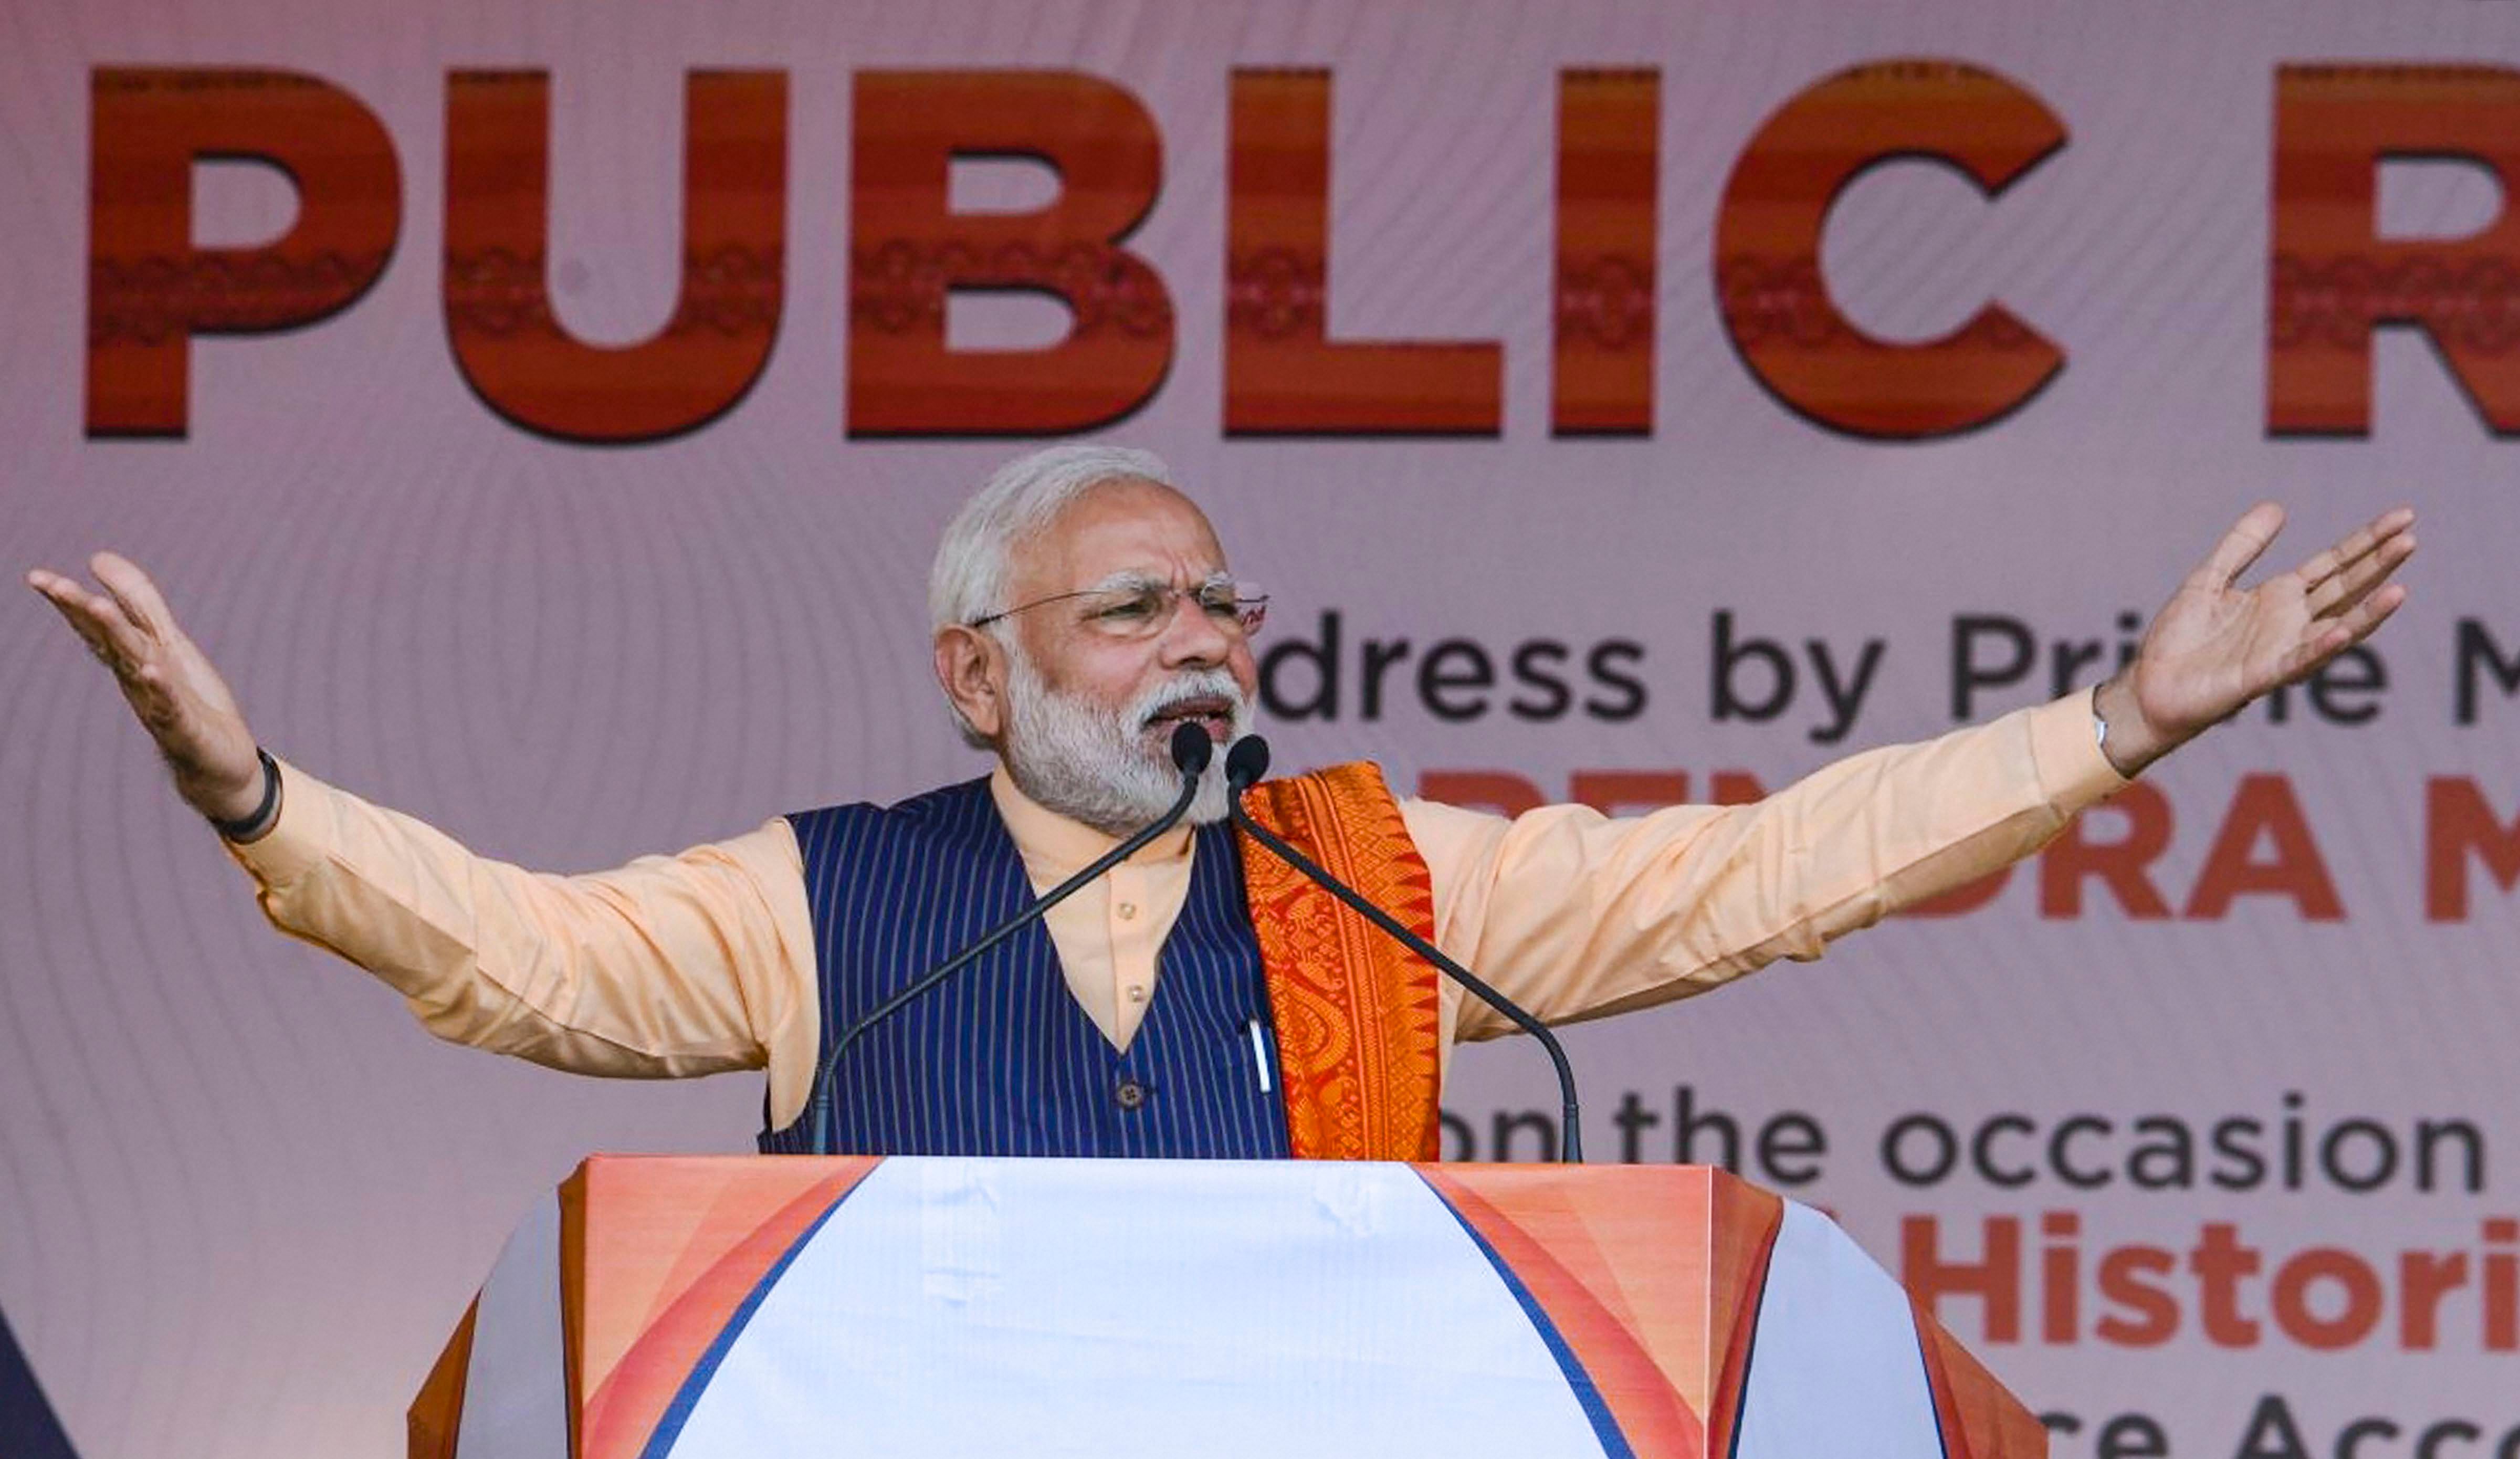 This new energy would take India to new heights in this decade, he added. (PTI Photo)